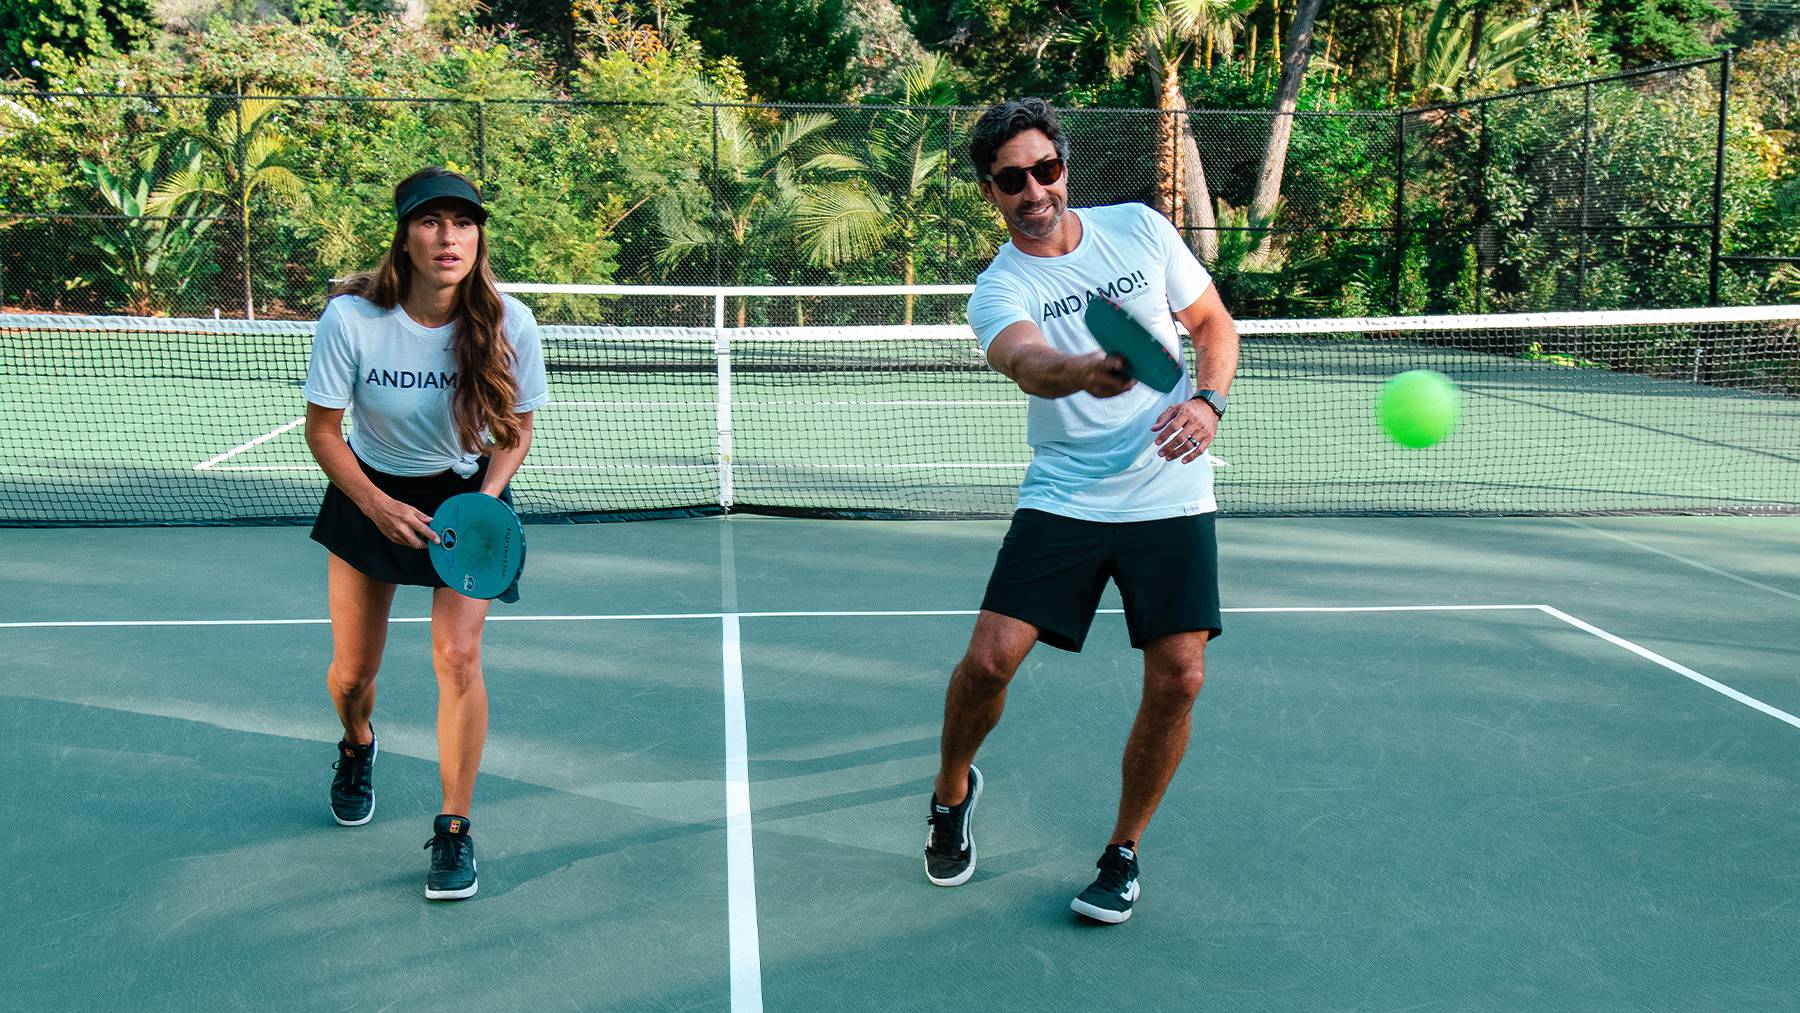 Activewear startup Civile targets pickleball players.